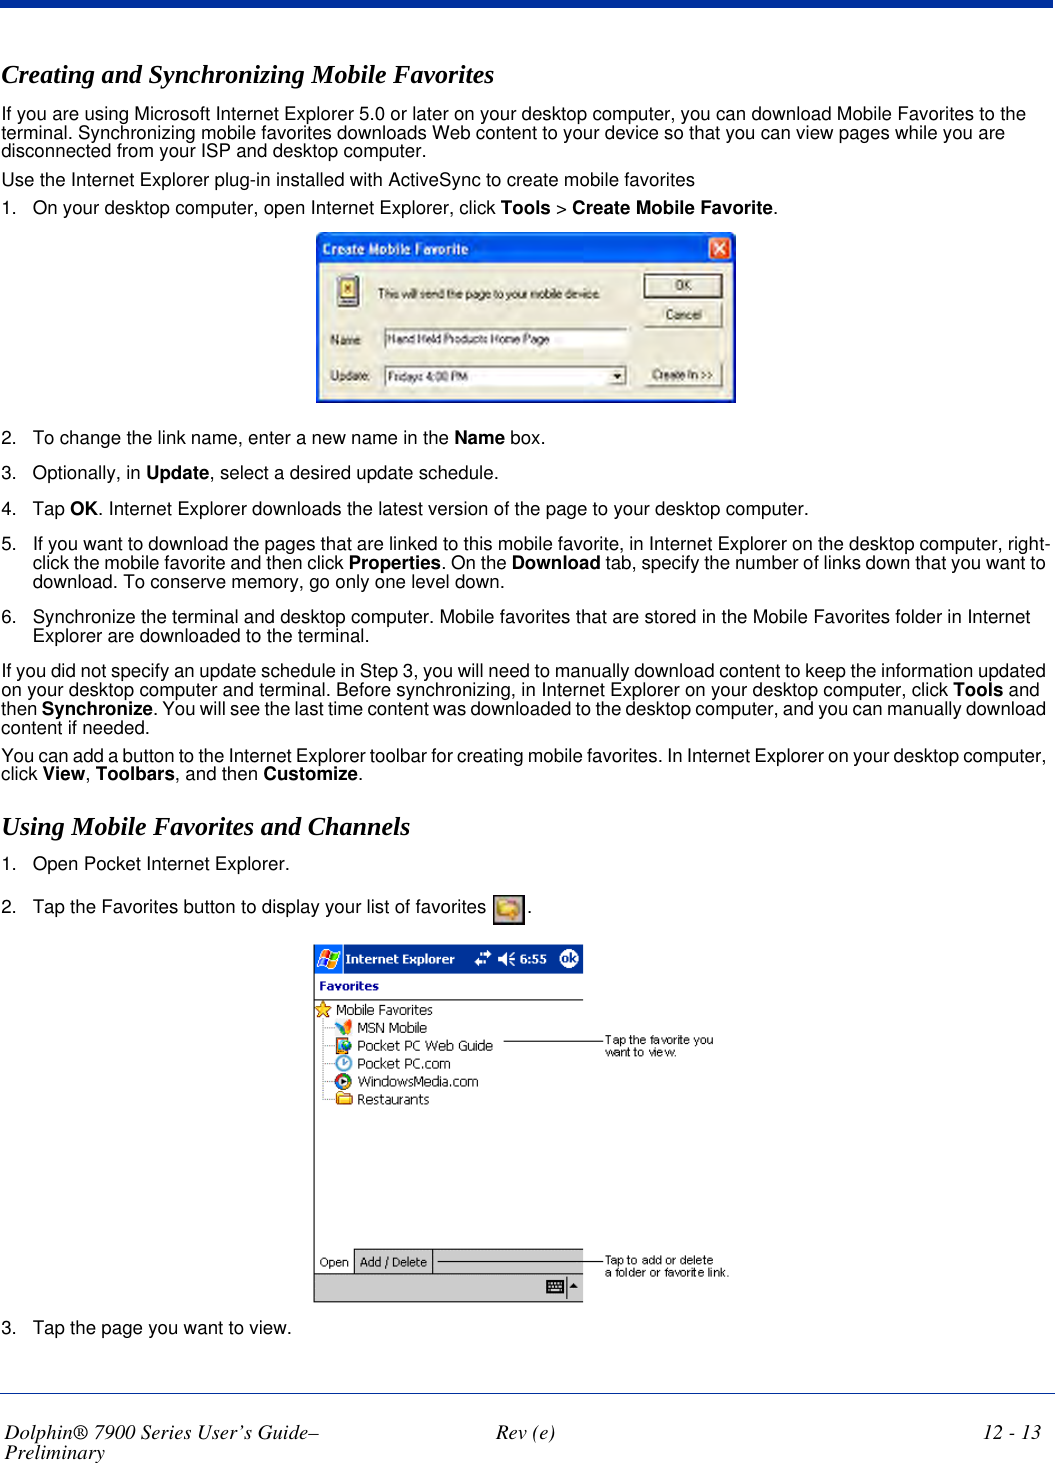 Dolphin® 7900 Series User’s Guide–Preliminary  Rev (e) 12 - 13Creating and Synchronizing Mobile Favorites If you are using Microsoft Internet Explorer 5.0 or later on your desktop computer, you can download Mobile Favorites to the terminal. Synchronizing mobile favorites downloads Web content to your device so that you can view pages while you are disconnected from your ISP and desktop computer.Use the Internet Explorer plug-in installed with ActiveSync to create mobile favorites1. On your desktop computer, open Internet Explorer, click Tools &gt; Create Mobile Favorite.2. To change the link name, enter a new name in the Name box. 3. Optionally, in Update, select a desired update schedule.4. Tap OK. Internet Explorer downloads the latest version of the page to your desktop computer.5. If you want to download the pages that are linked to this mobile favorite, in Internet Explorer on the desktop computer, right-click the mobile favorite and then click Properties. On the Download tab, specify the number of links down that you want to download. To conserve memory, go only one level down.6. Synchronize the terminal and desktop computer. Mobile favorites that are stored in the Mobile Favorites folder in Internet Explorer are downloaded to the terminal.If you did not specify an update schedule in Step 3, you will need to manually download content to keep the information updated on your desktop computer and terminal. Before synchronizing, in Internet Explorer on your desktop computer, click Tools and then Synchronize. You will see the last time content was downloaded to the desktop computer, and you can manually download content if needed.You can add a button to the Internet Explorer toolbar for creating mobile favorites. In Internet Explorer on your desktop computer, click View, Toolbars, and then Customize.Using Mobile Favorites and Channels 1. Open Pocket Internet Explorer.2. Tap the Favorites button to display your list of favorites  . 3. Tap the page you want to view. 